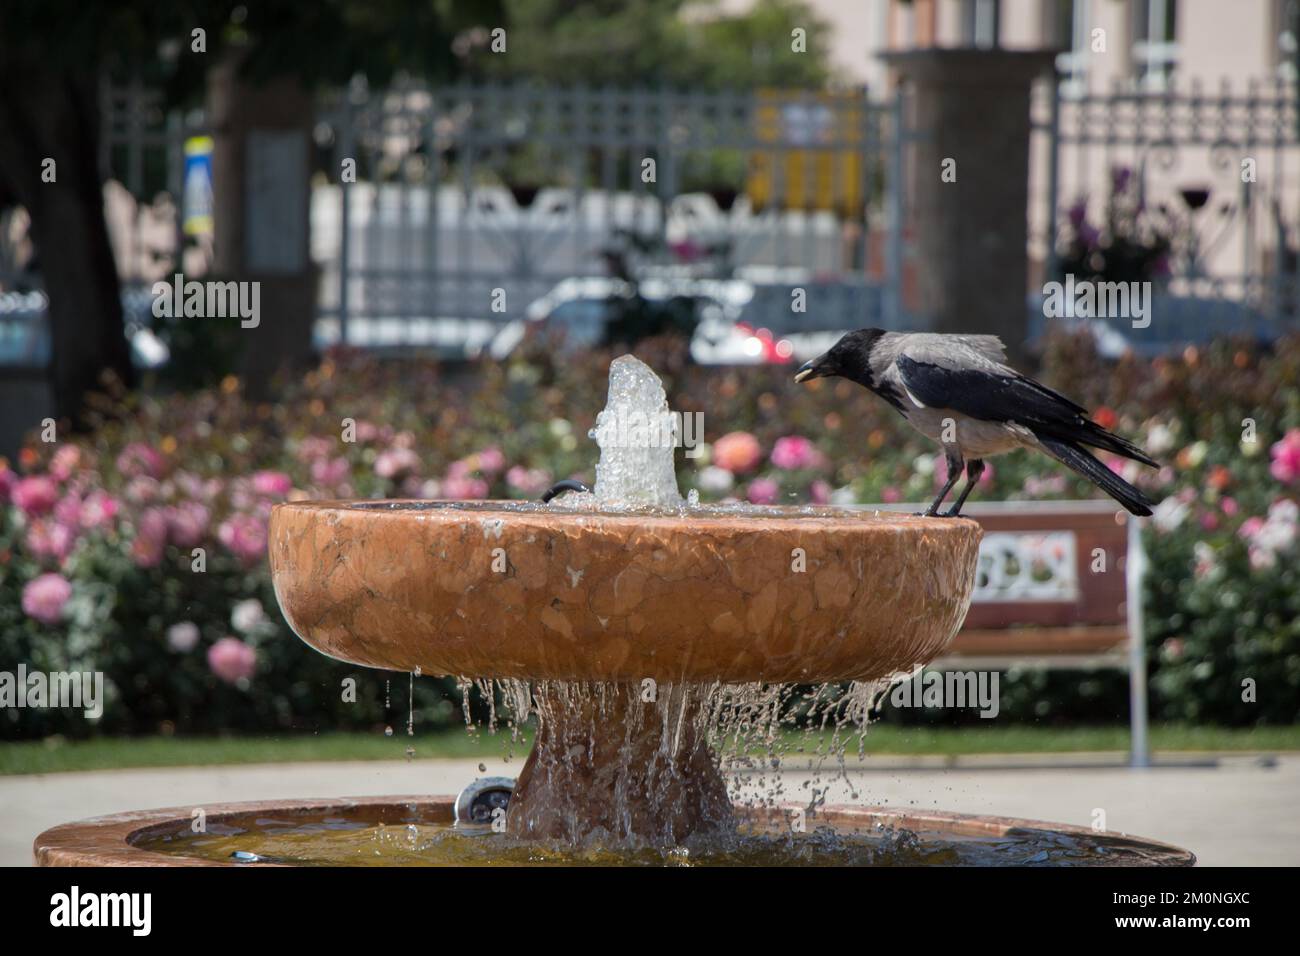 Crow by the side of gushing water in the rose garden Stock Photo